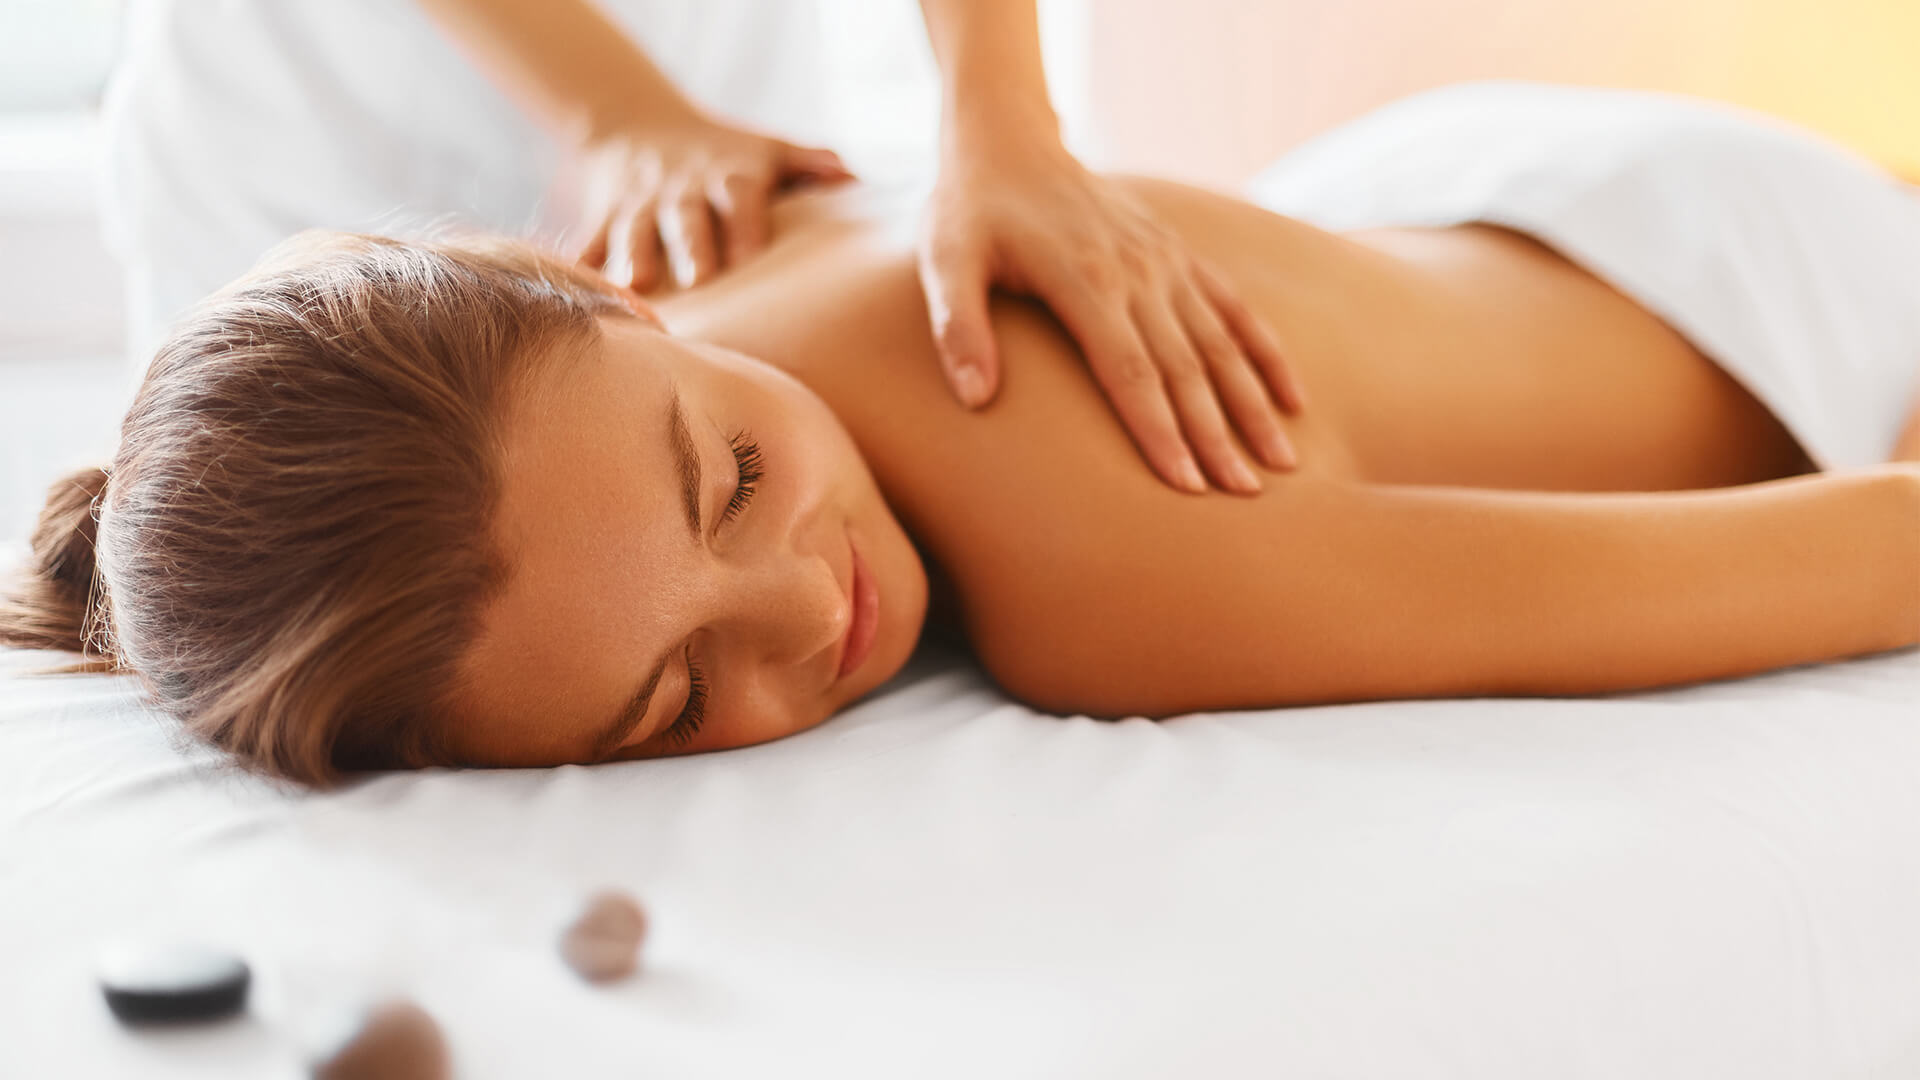 The Ultimate Guide to Cancer-Safe Spa Treatments